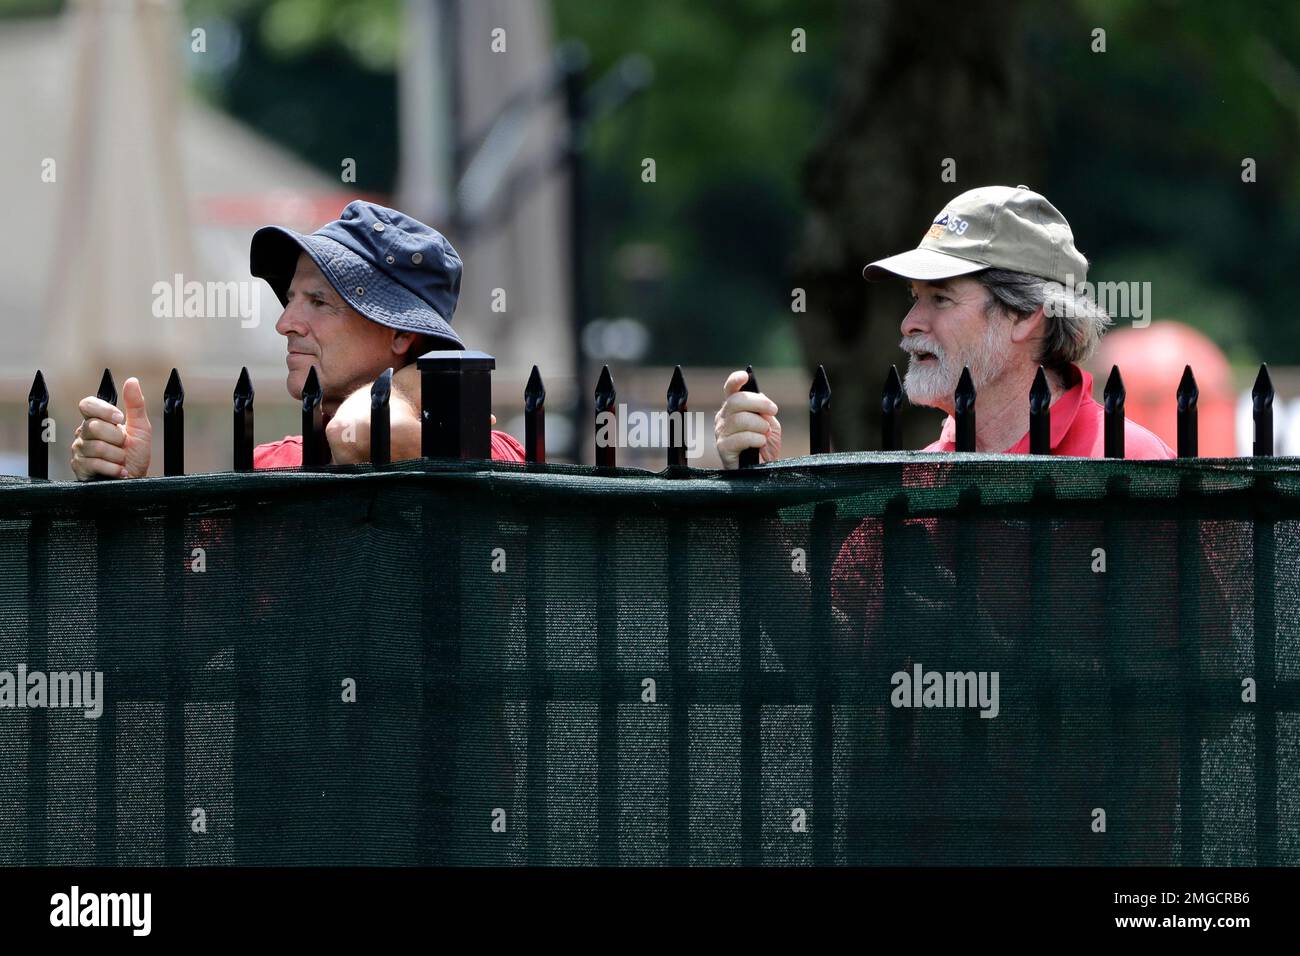 Fans watch Rory McIlroy, of Northern Ireland, play through on the sixth green from behind a fence during the final round of the Travelers Championship golf tournament at TPC River Highlands, Sunday,